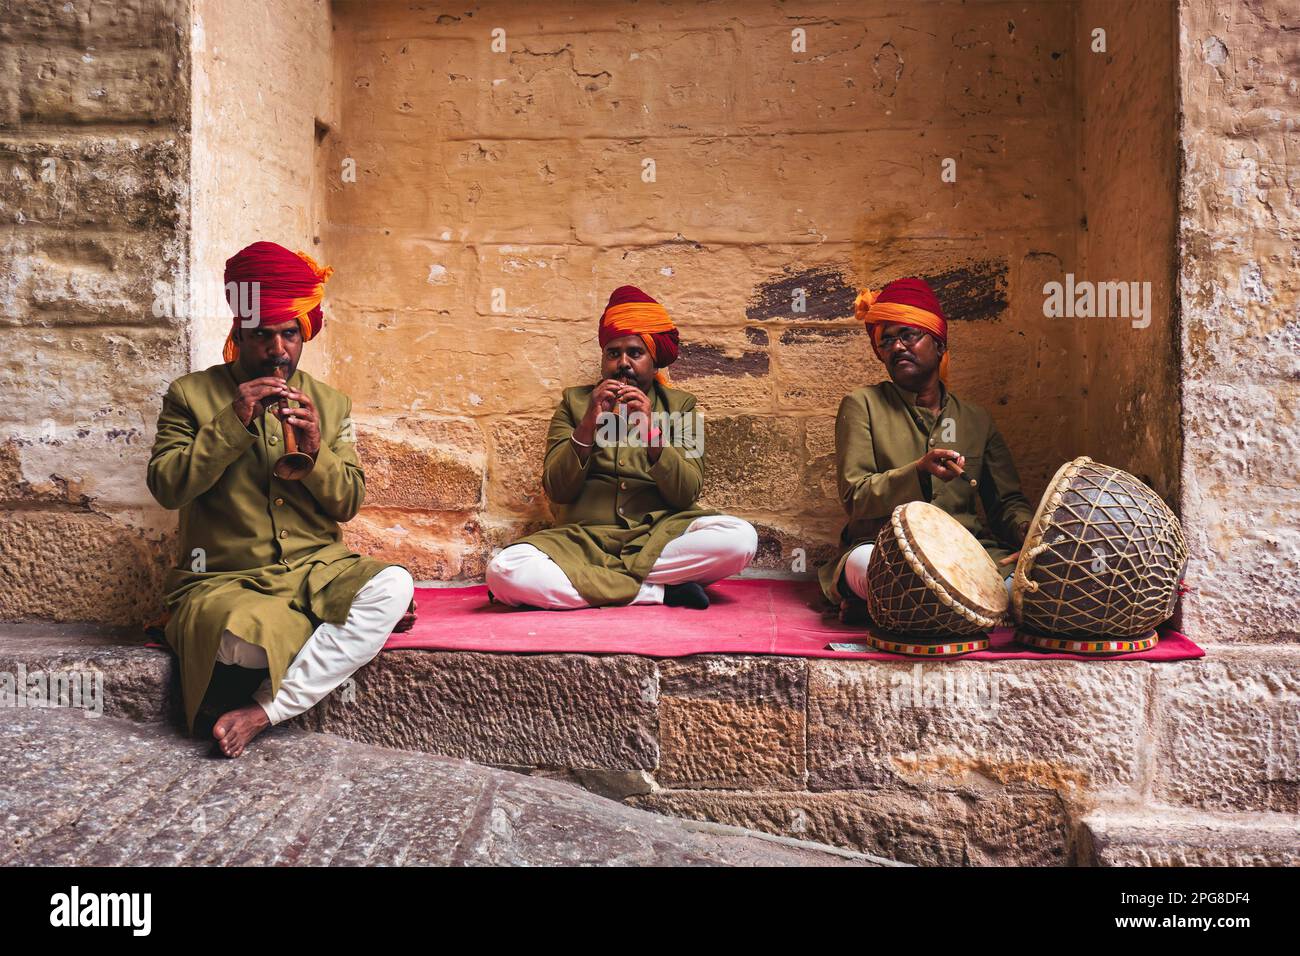 Musicians playing and singing traditional Rajasthani songs and music in Mehrangarh fort, Rajasthan, India Stock Photo